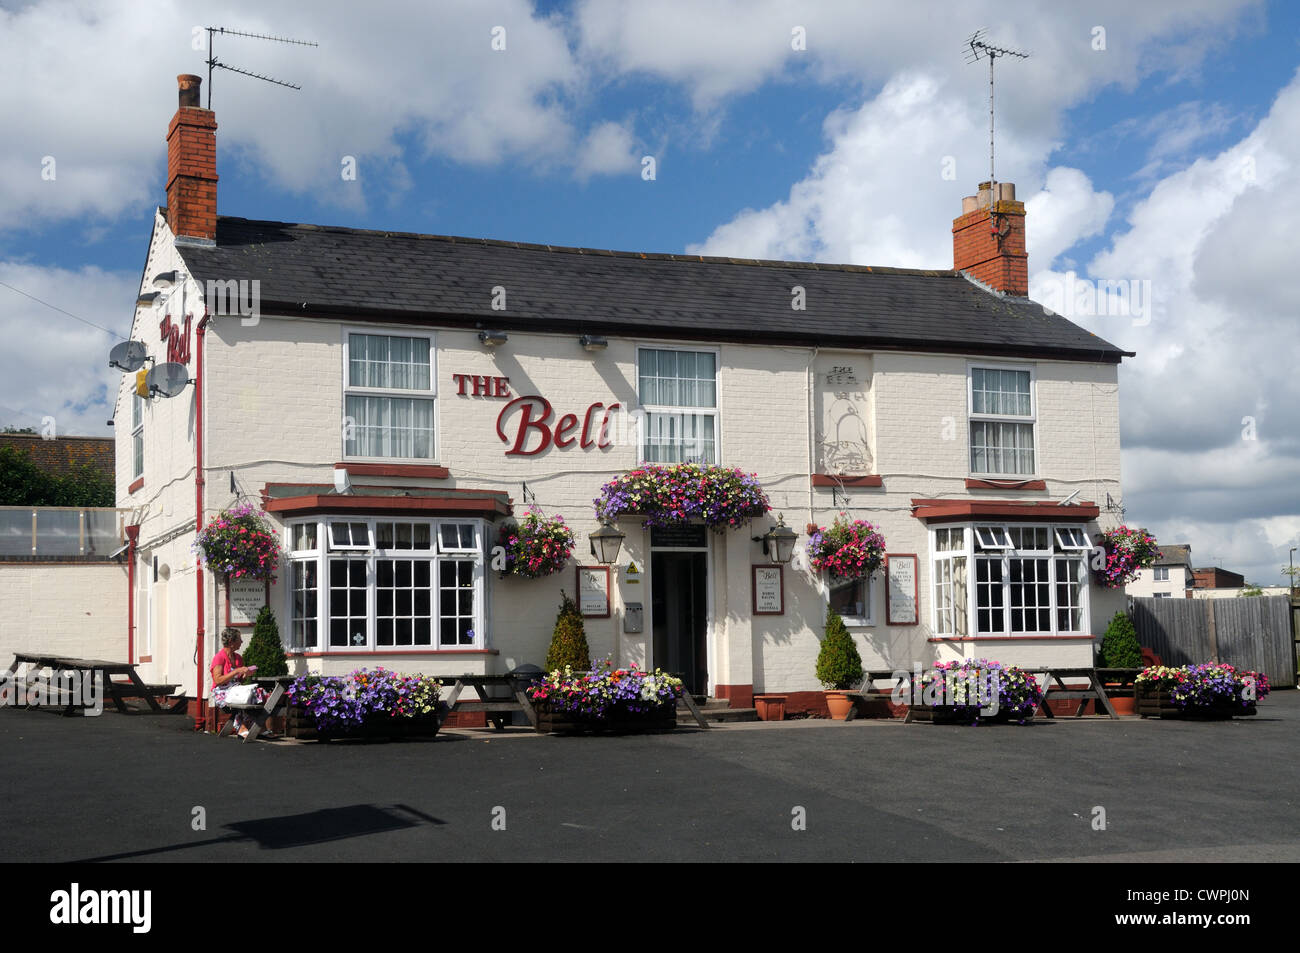 The Bell Inn, in Studley, Warwickshire, England Stock Photo